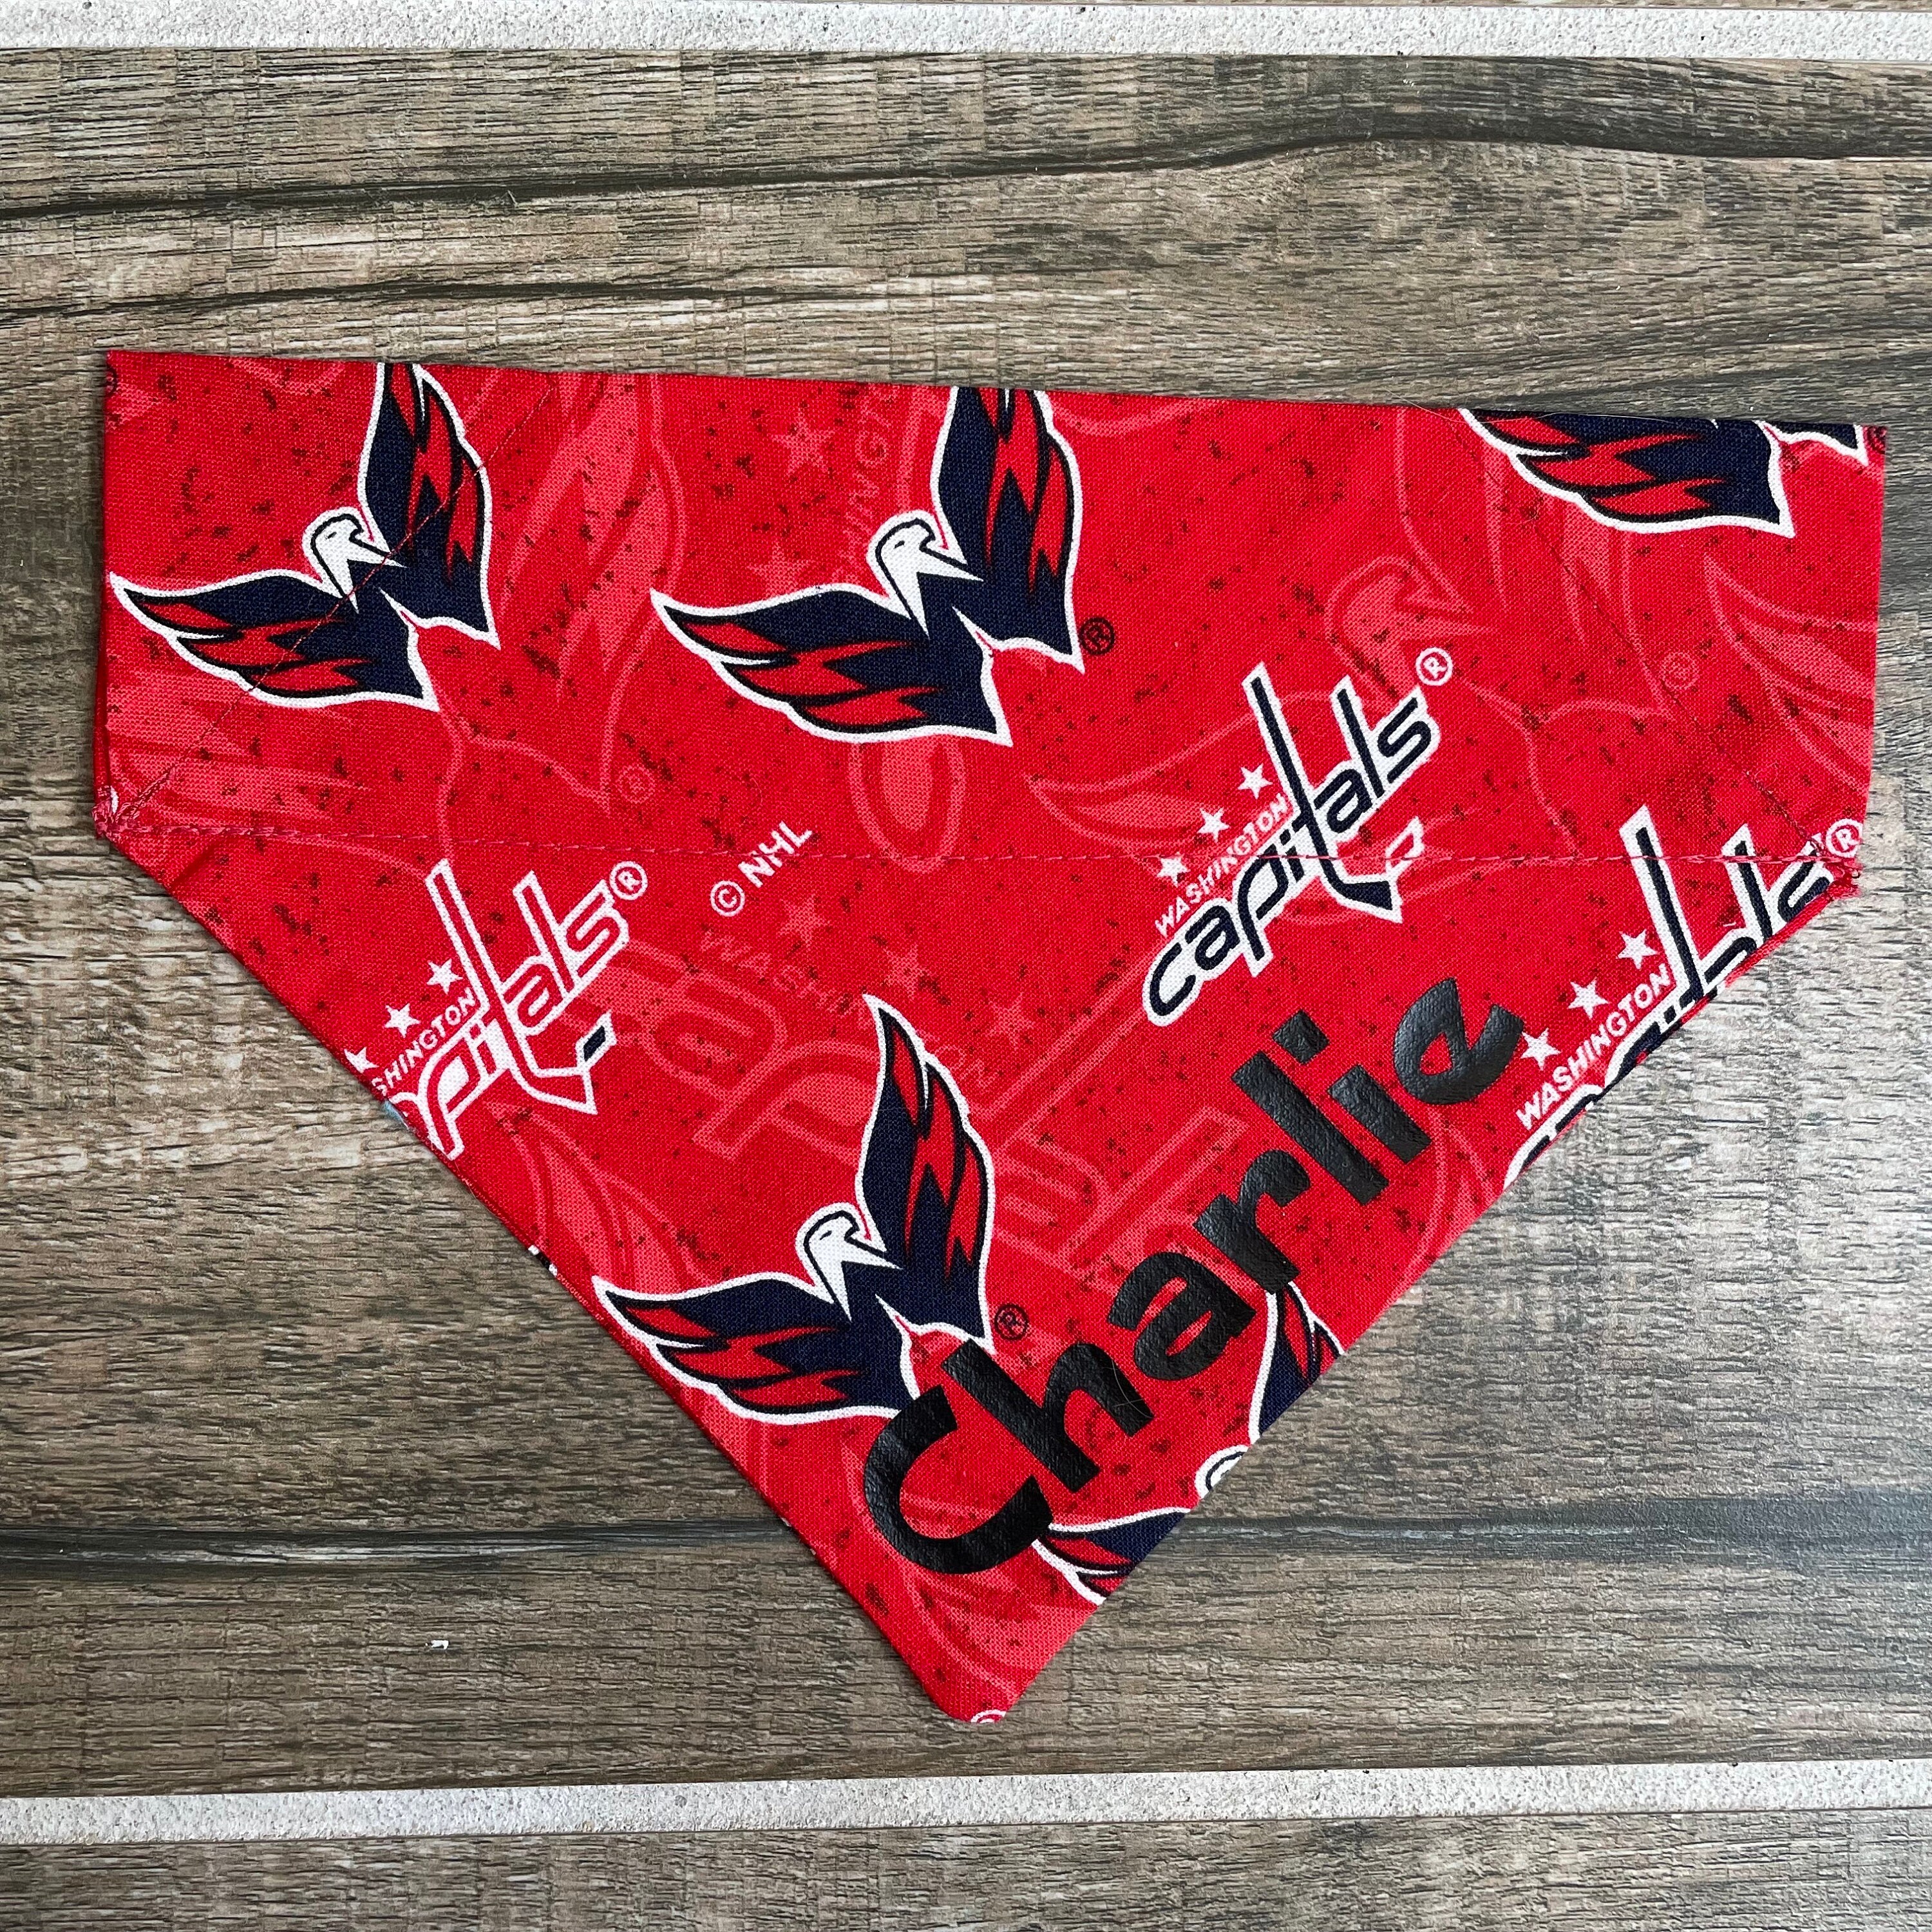 Washington Capitals Dog Collars, Leashes, ID Tags, Jerseys & More –  Athletic Pets